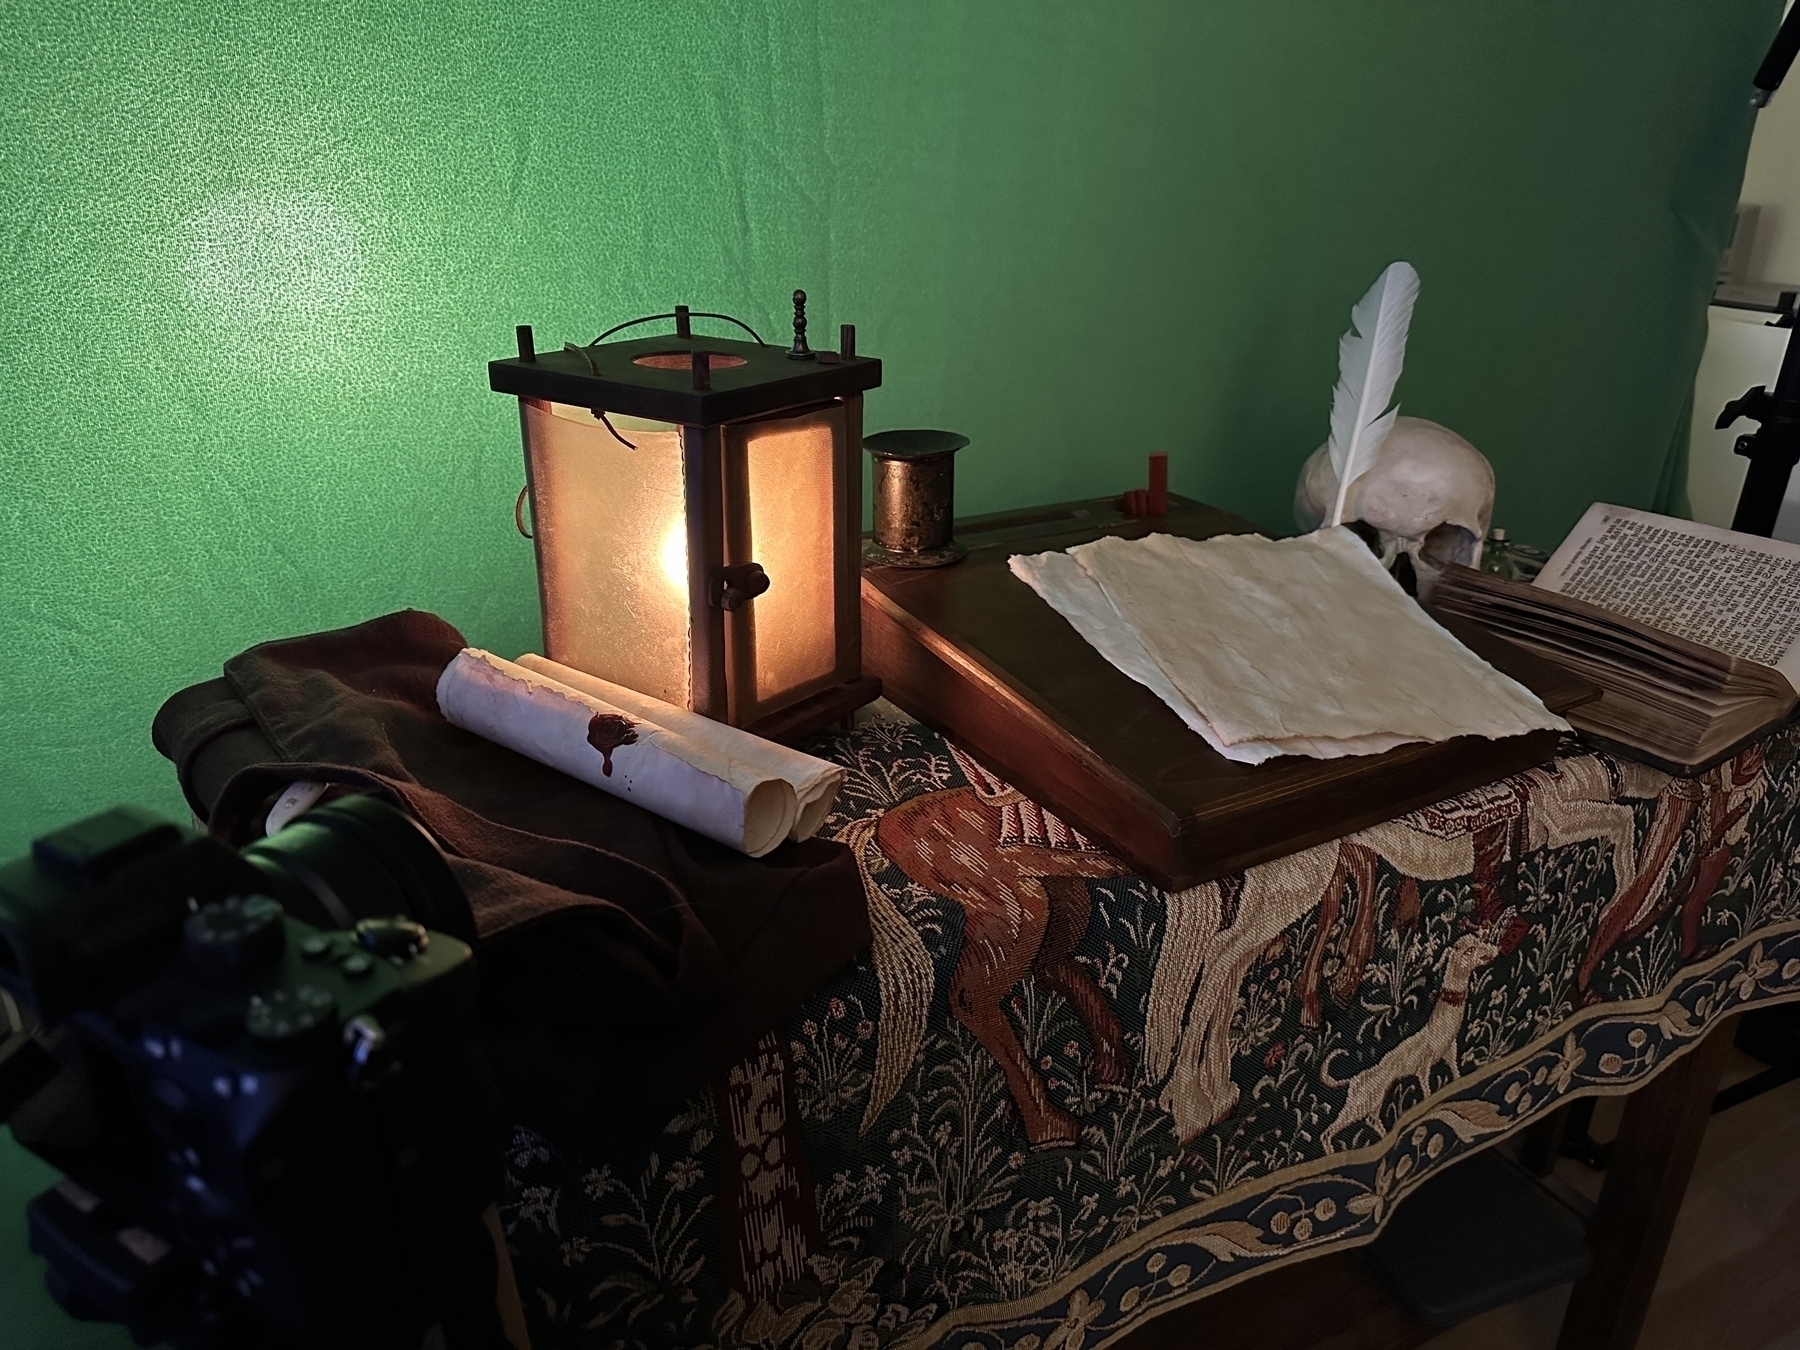 Medieval desk in front of a green screen